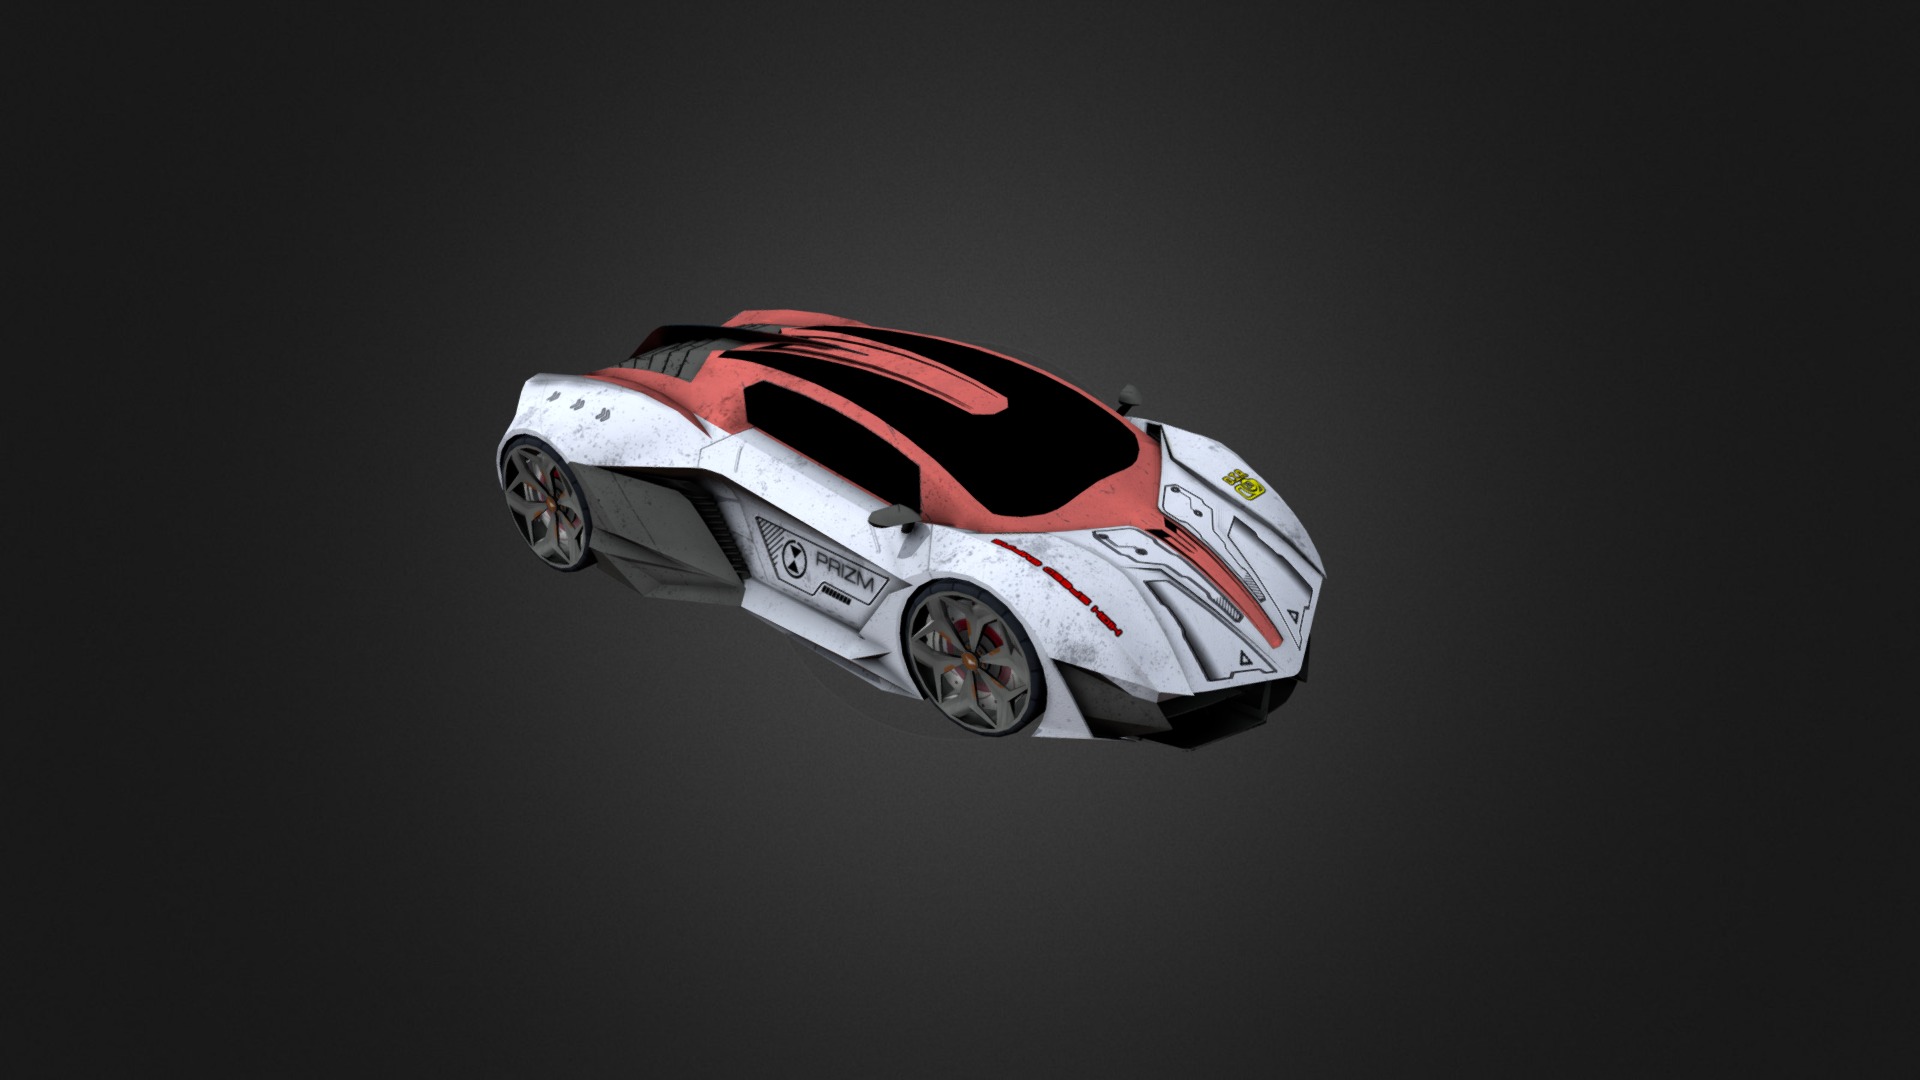 3D model Lamborghini(Game car) - This is a 3D model of the Lamborghini(Game car). The 3D model is about a white and red race car.